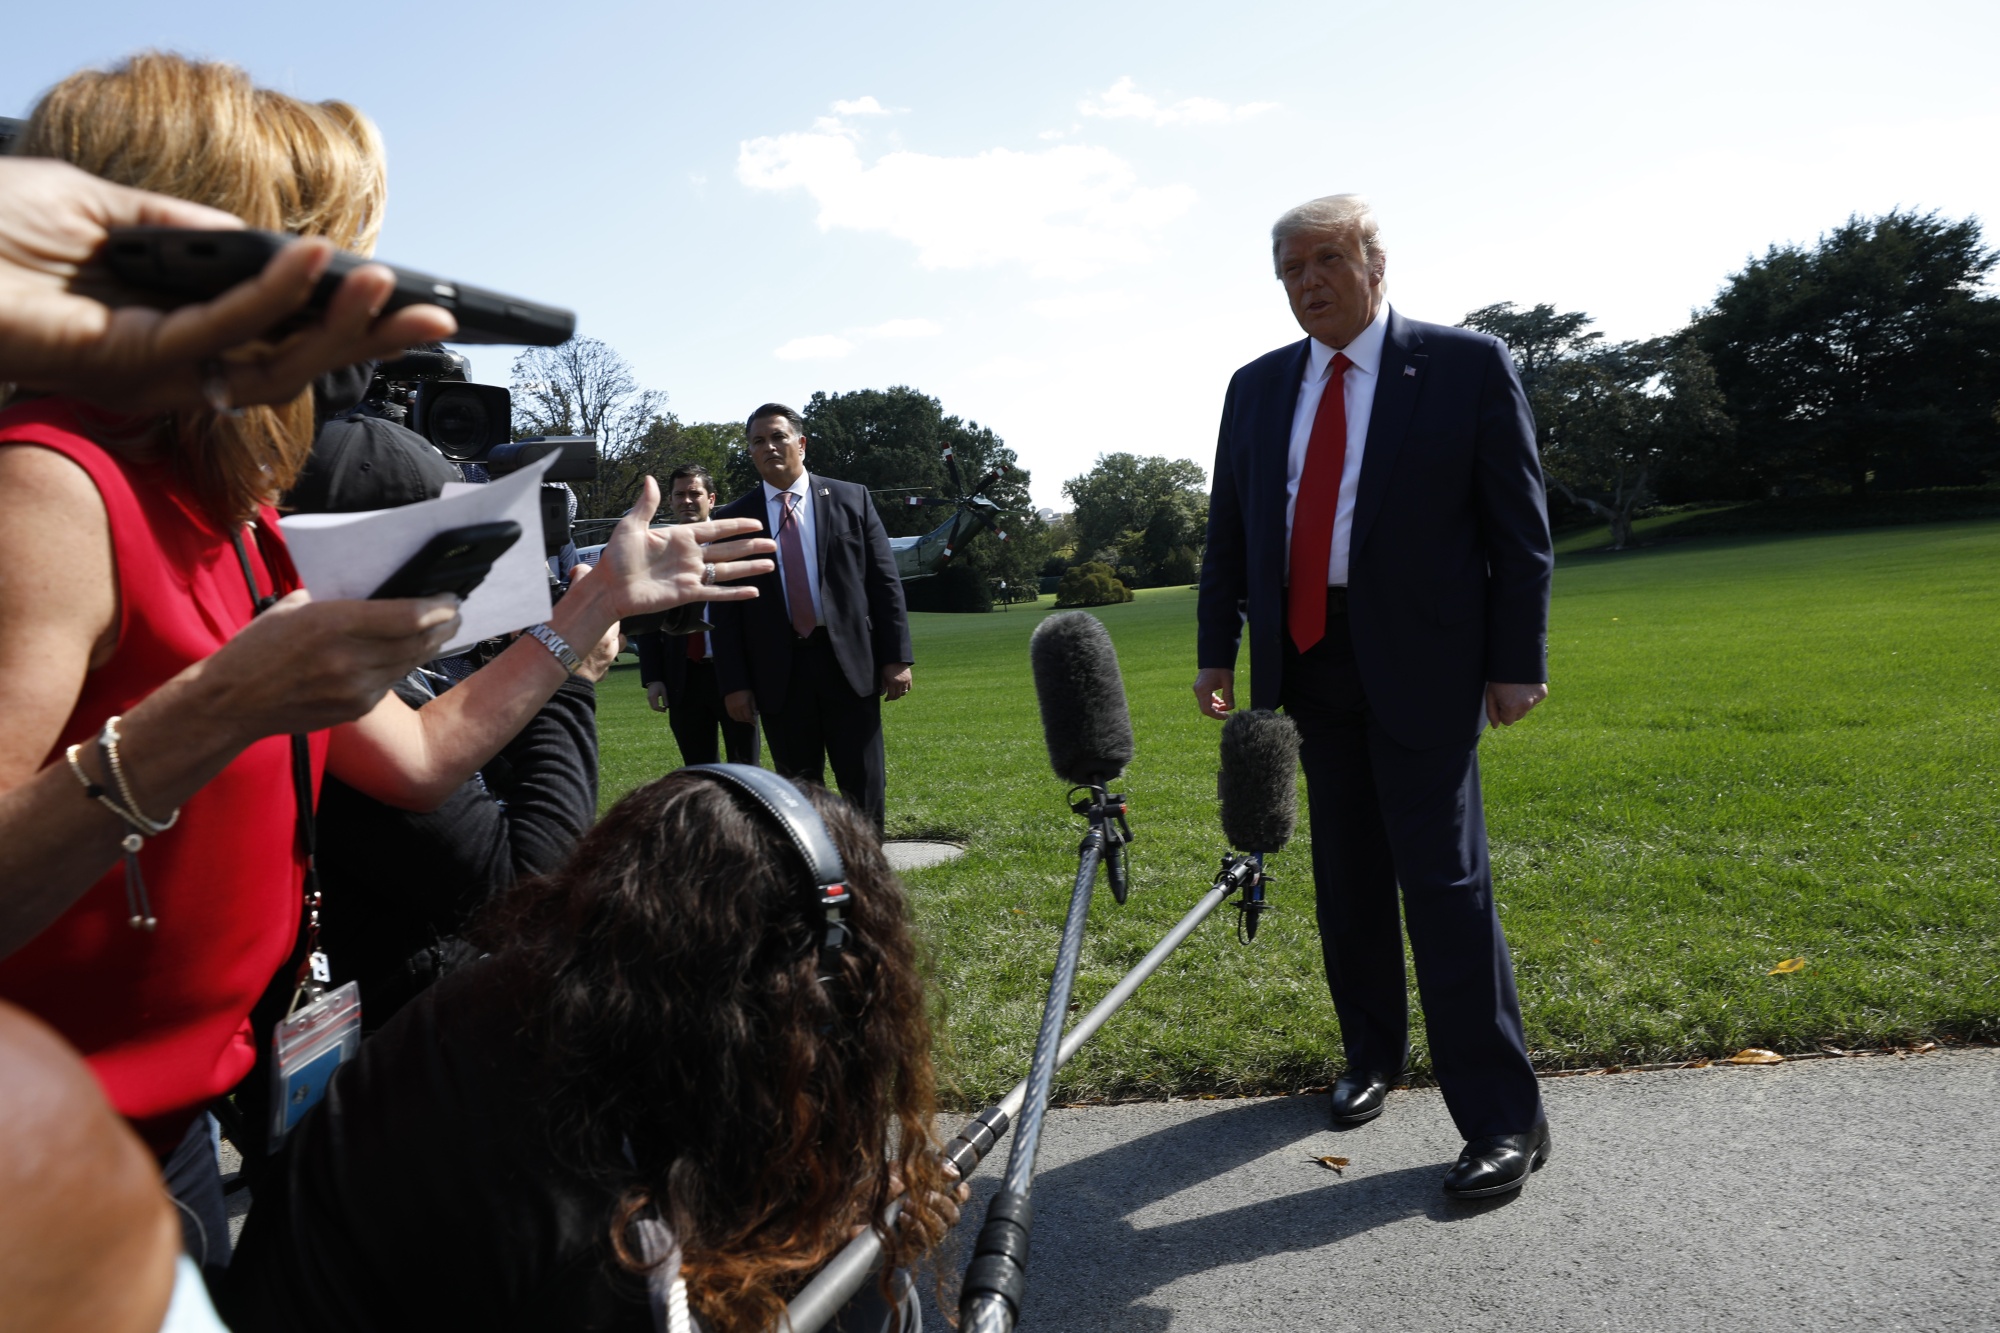 Donald Trump speaks to members of the media before boarding Marine One at the White House on Sept. 30.